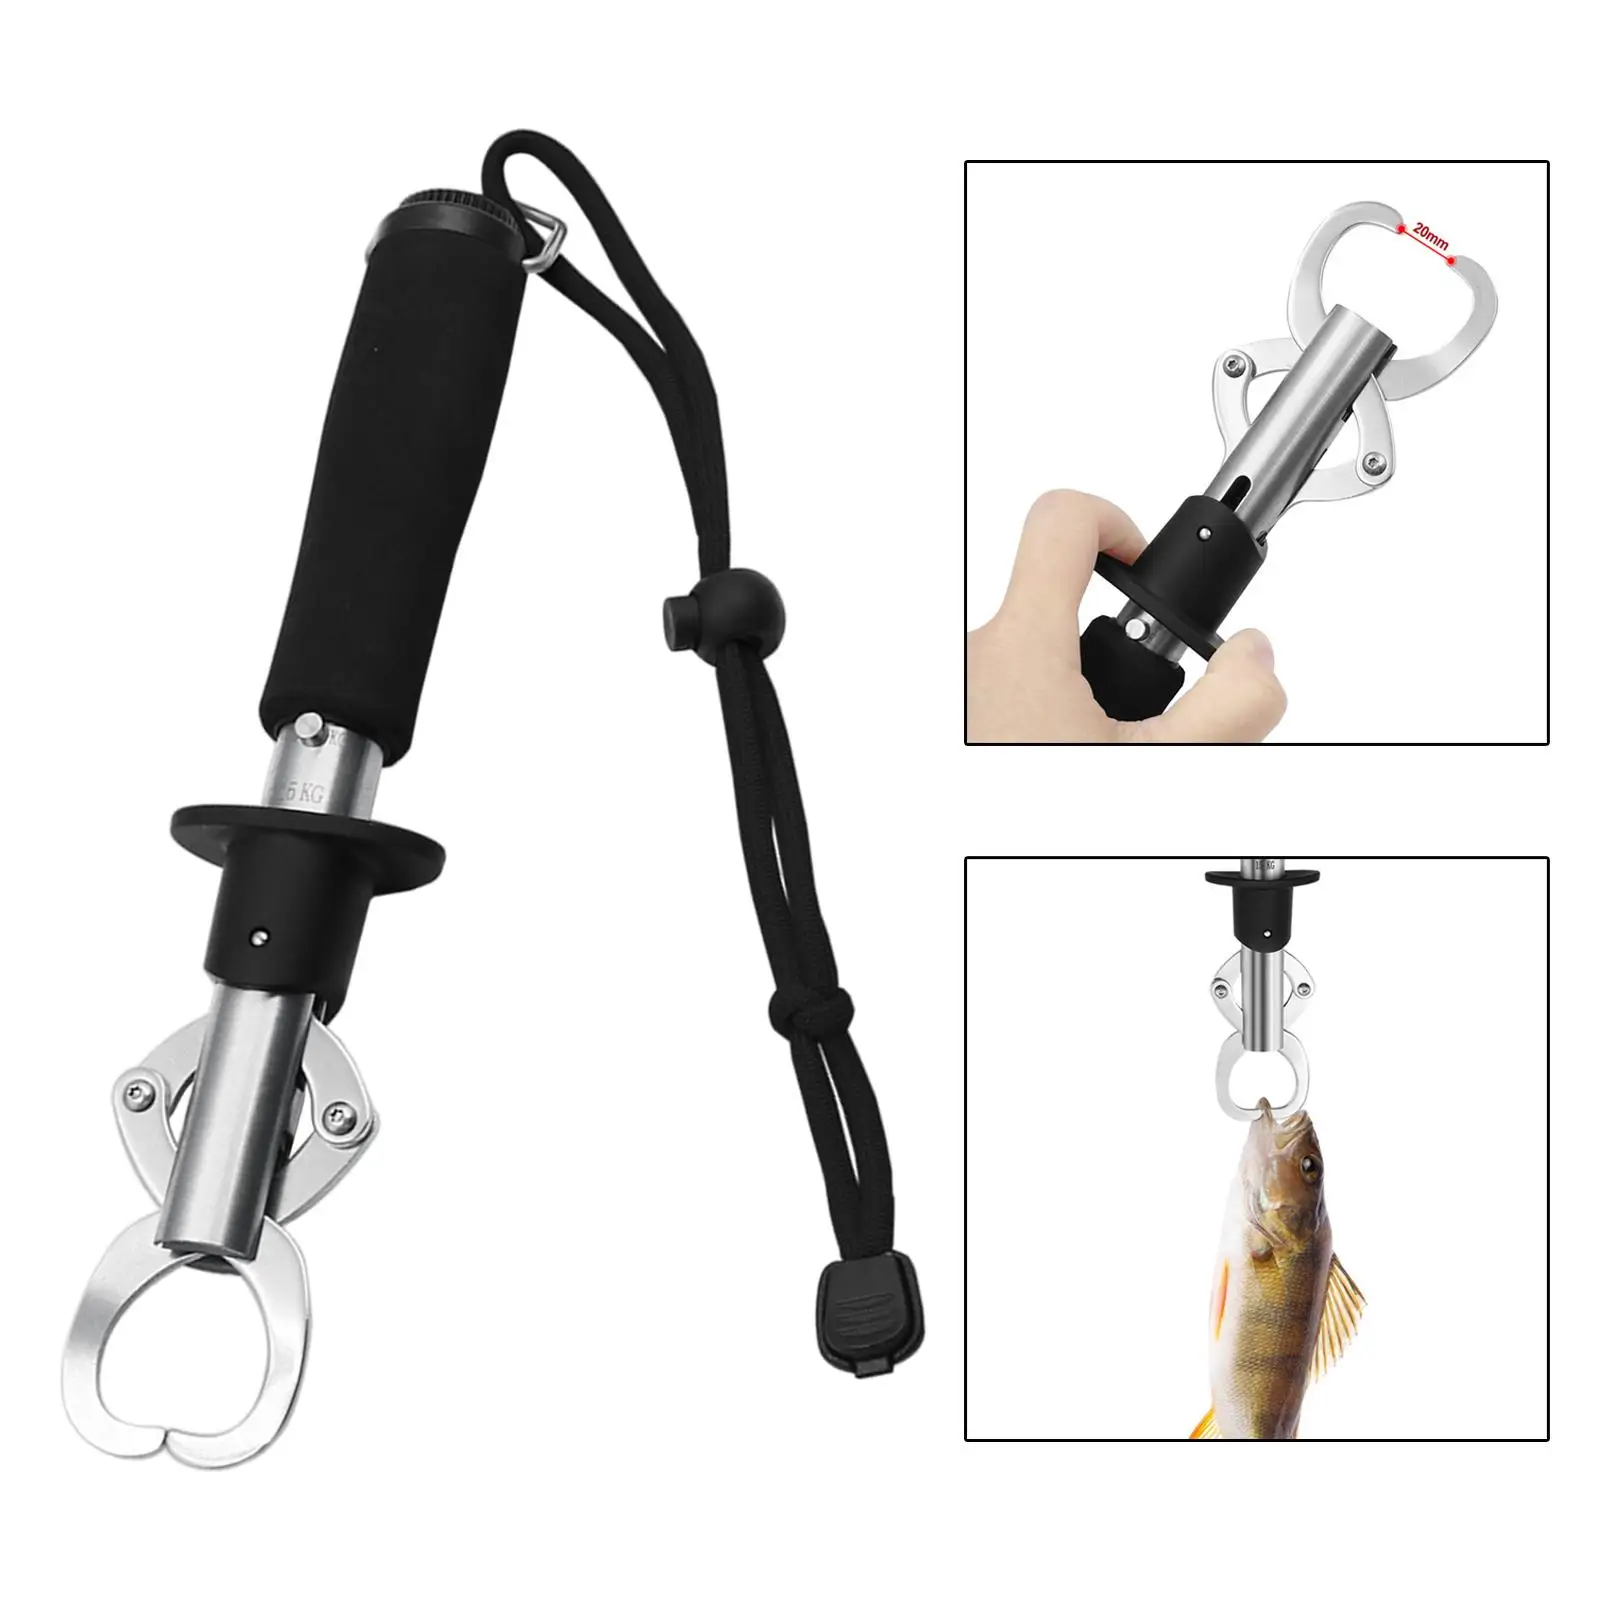 SAN LIKE Fishing Gripper Portable Fishing Grip Tool Corrosion Resistant Fish Holder Aluminum Fish Lip Grabber with Non-Slip EVA Handle Fish Controller with Scale/Floating Support 40lb Max 